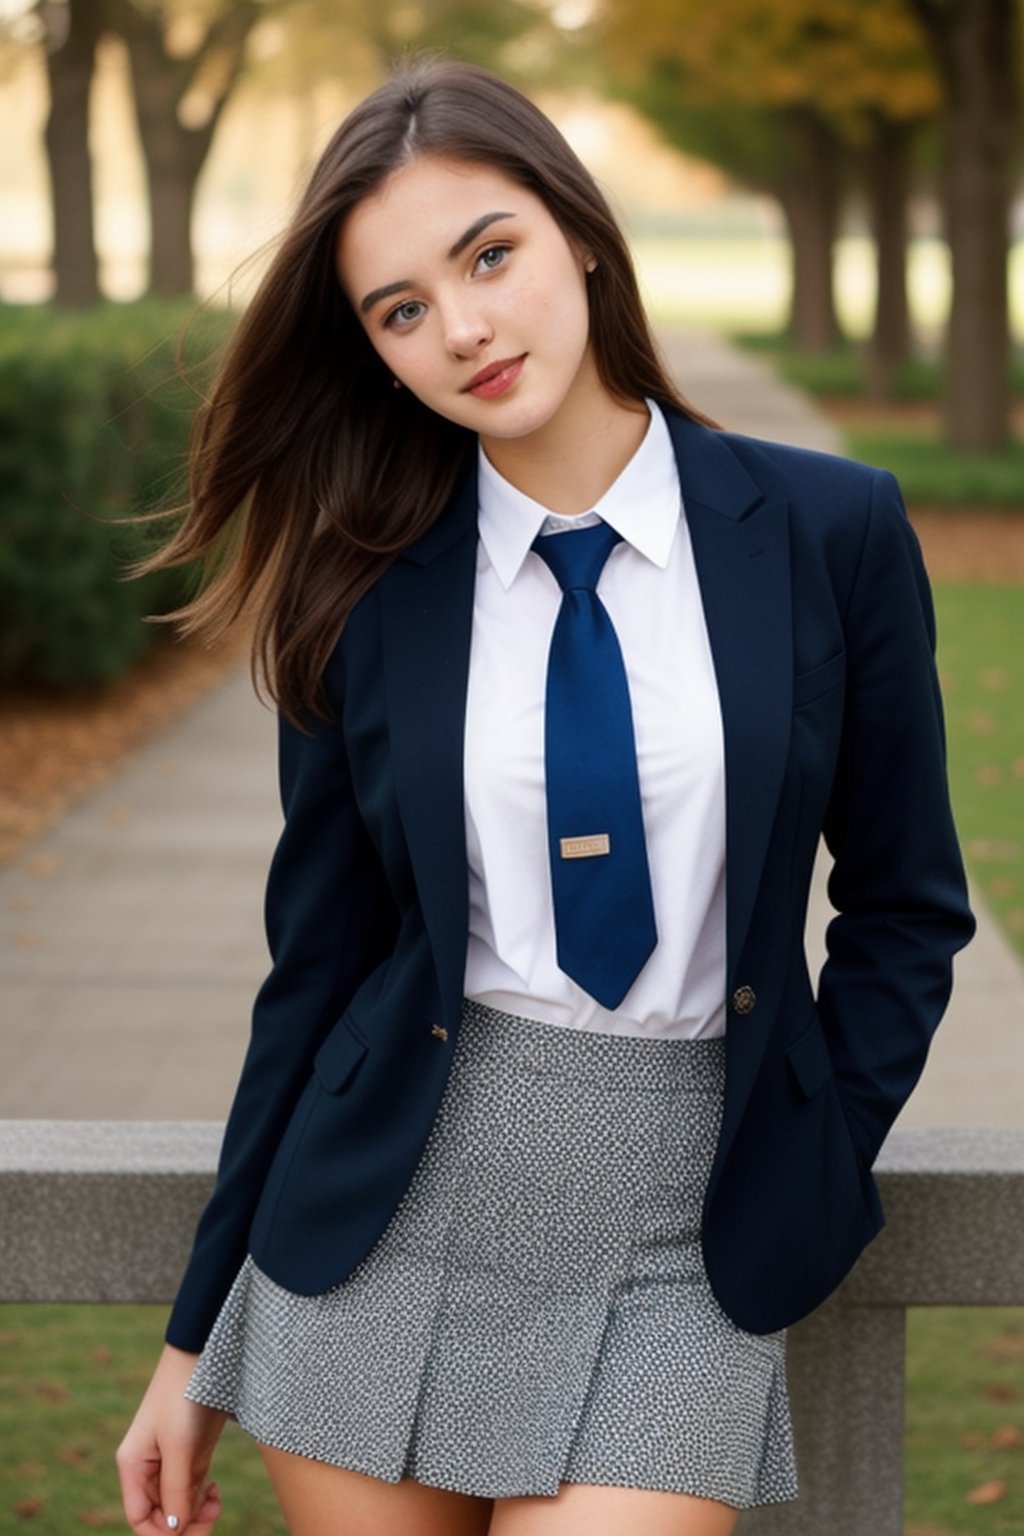 A beatiful 21 years old brunette woman, gorgeus, perfect face, beautiful body, she wearing college uniform with tie, blazer and skirt ,Realism